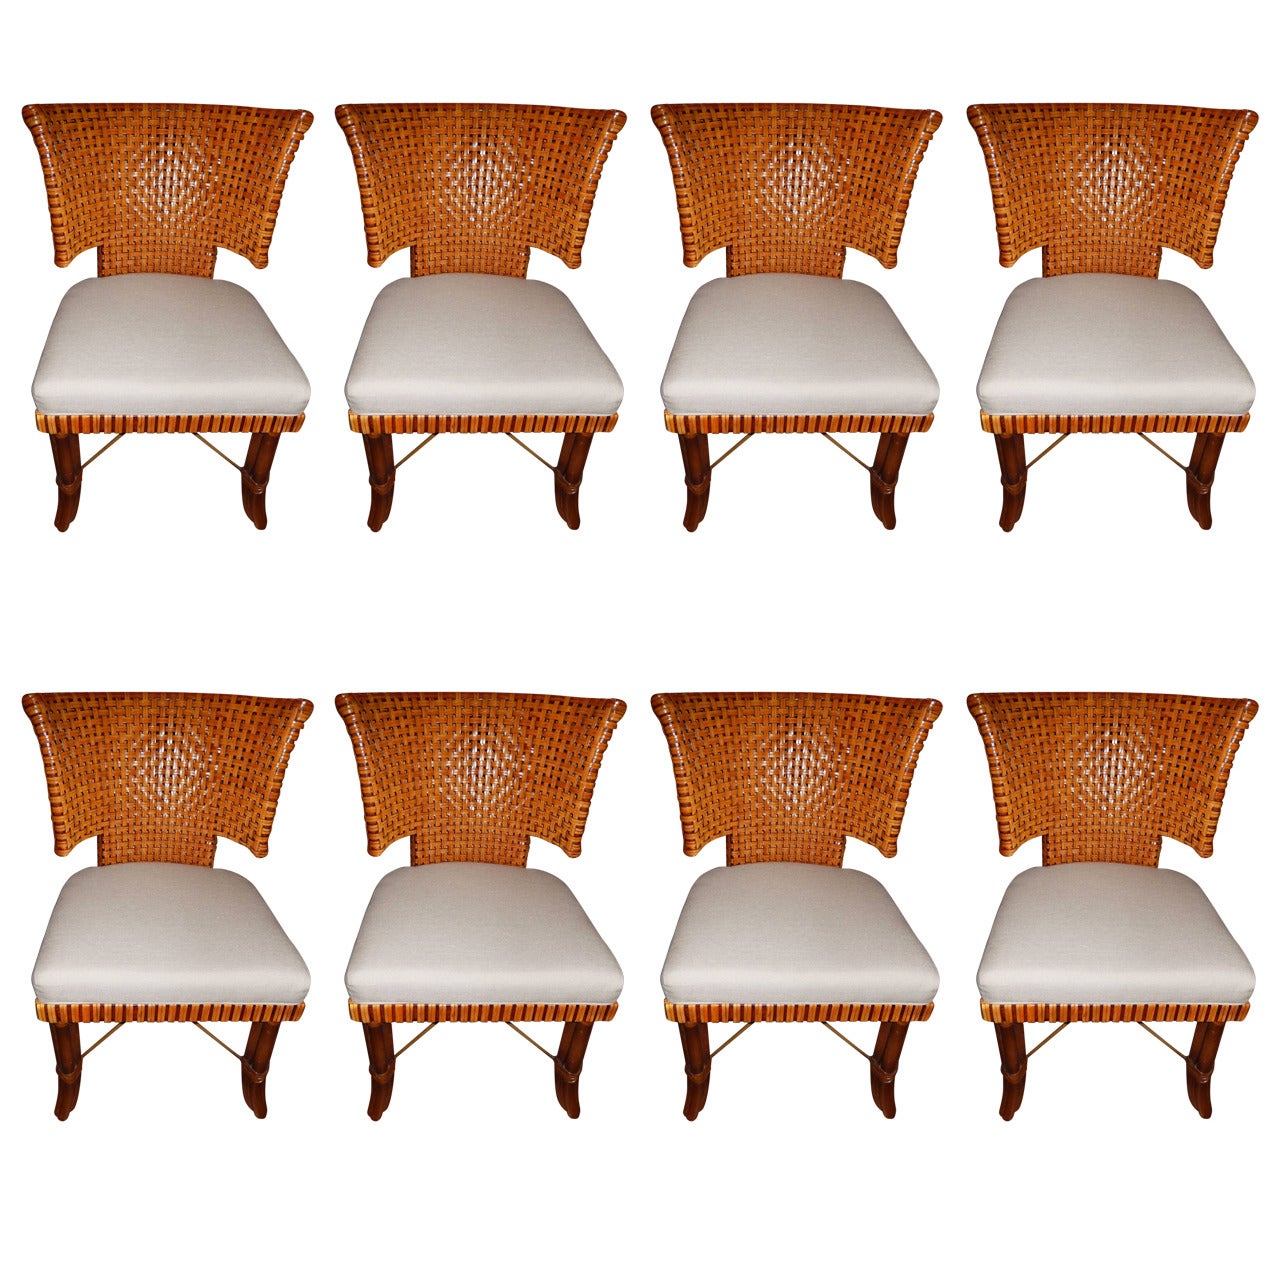 Eight Handwoven Leather Dining Room Chairs